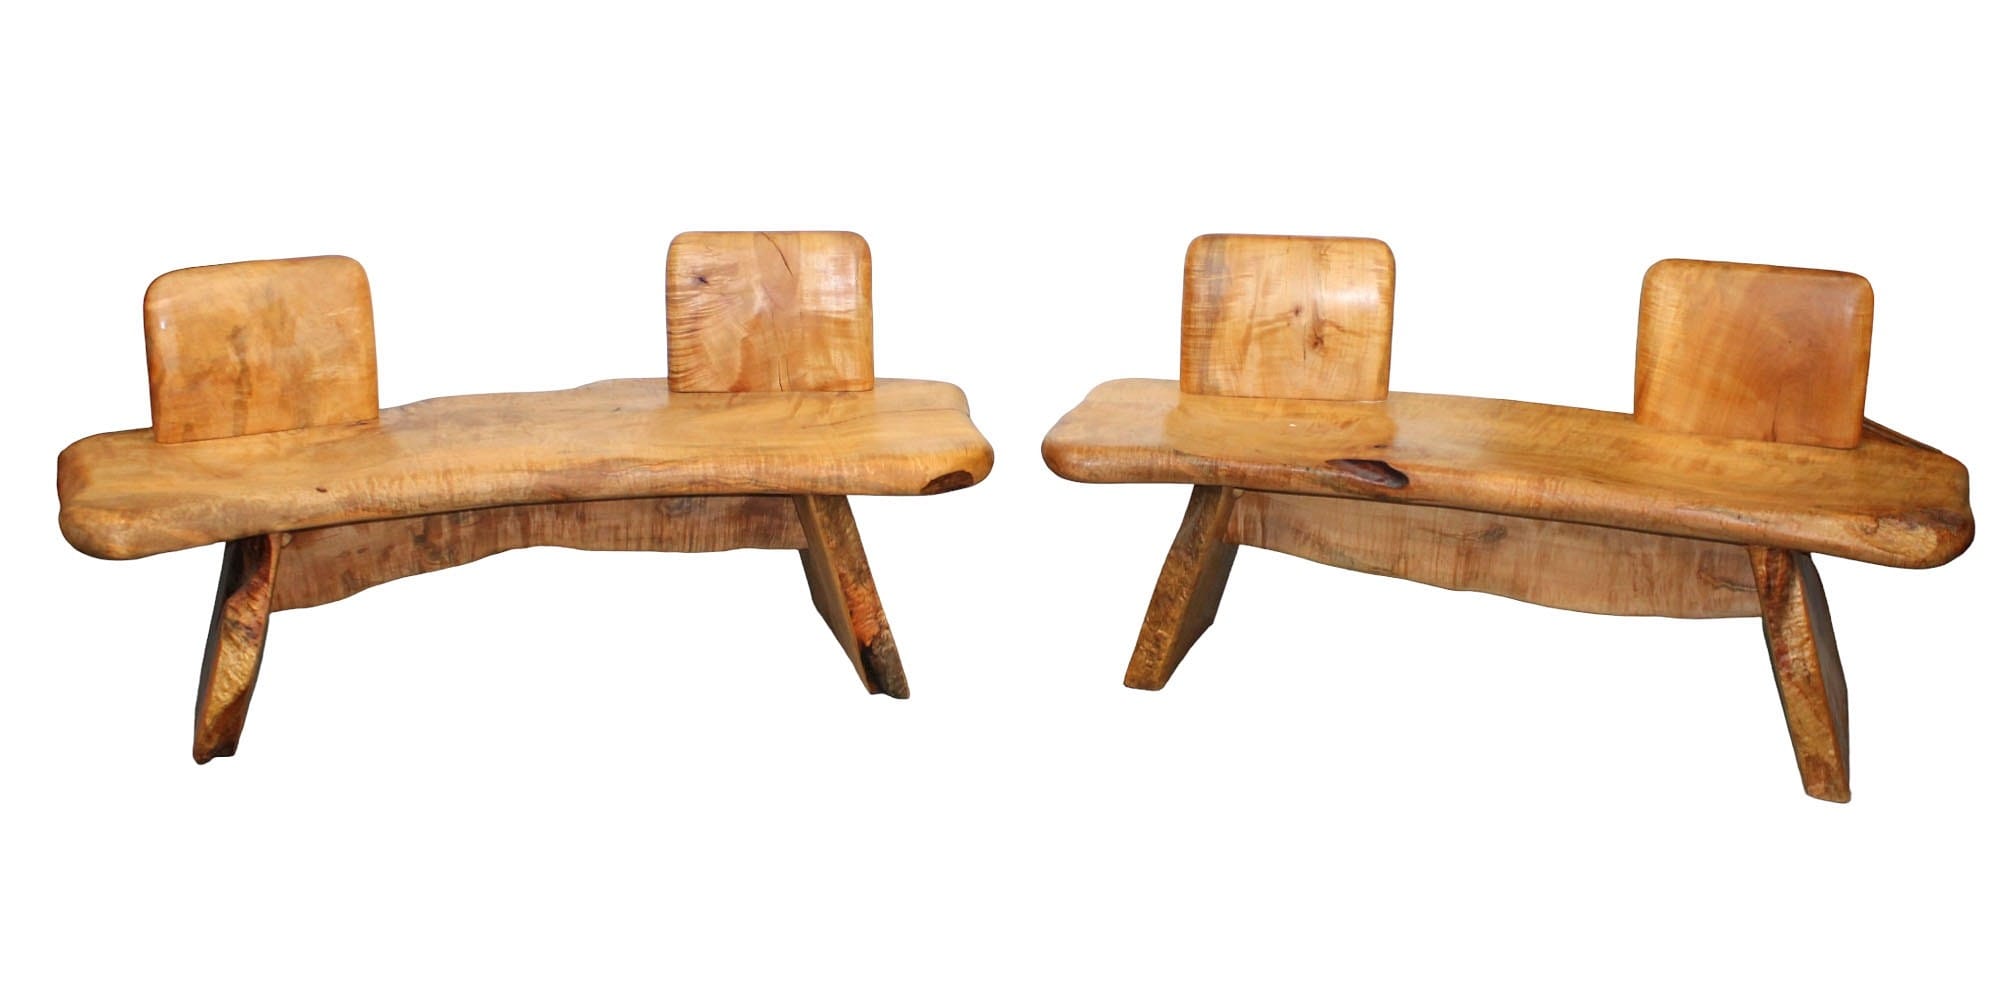 Pair of Brutalist solid maple benches with natural edges